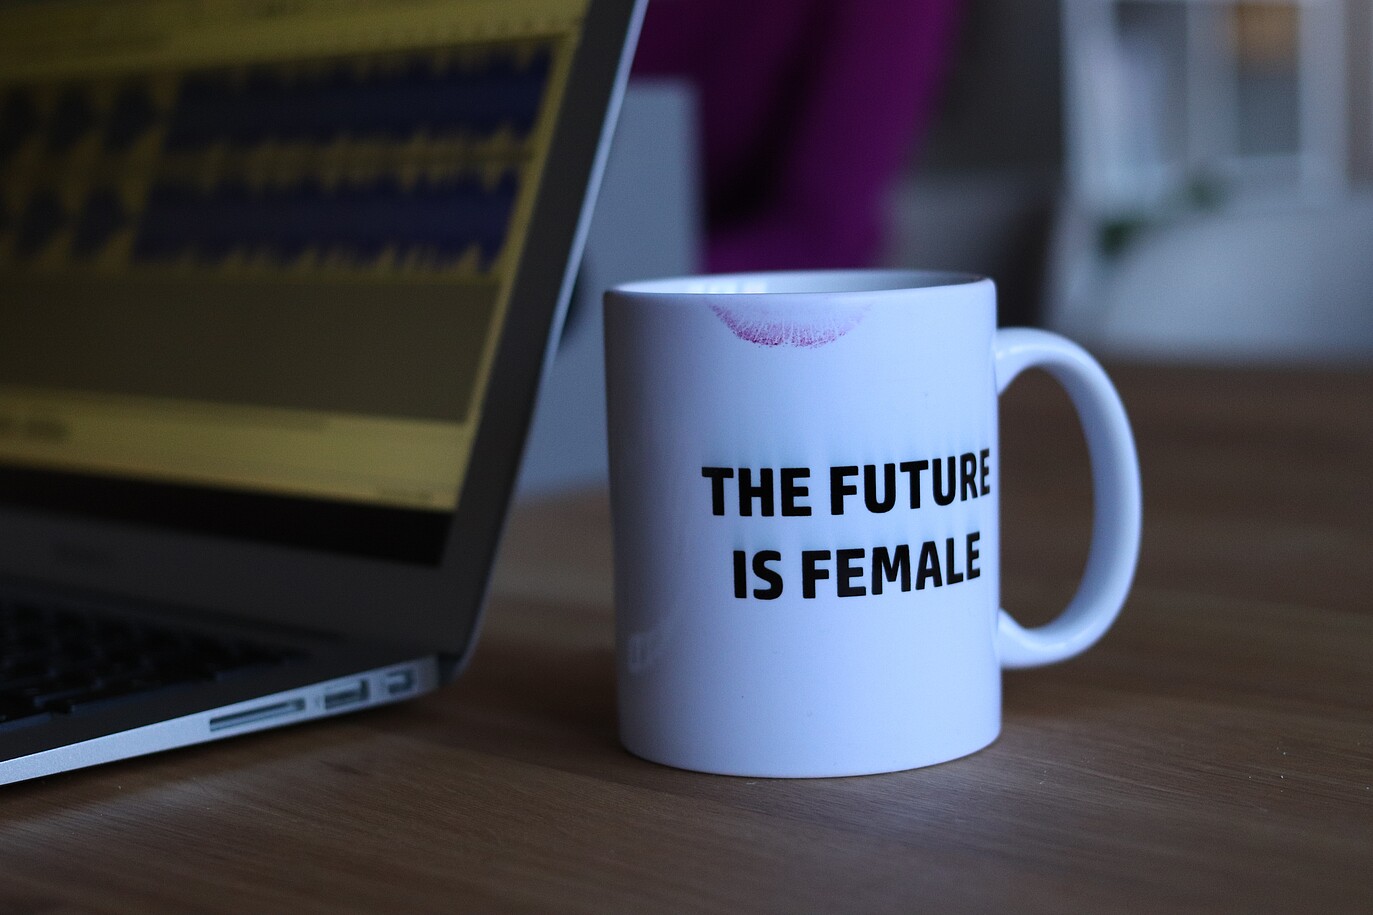 Laptop with mug that says "The Future is Female"